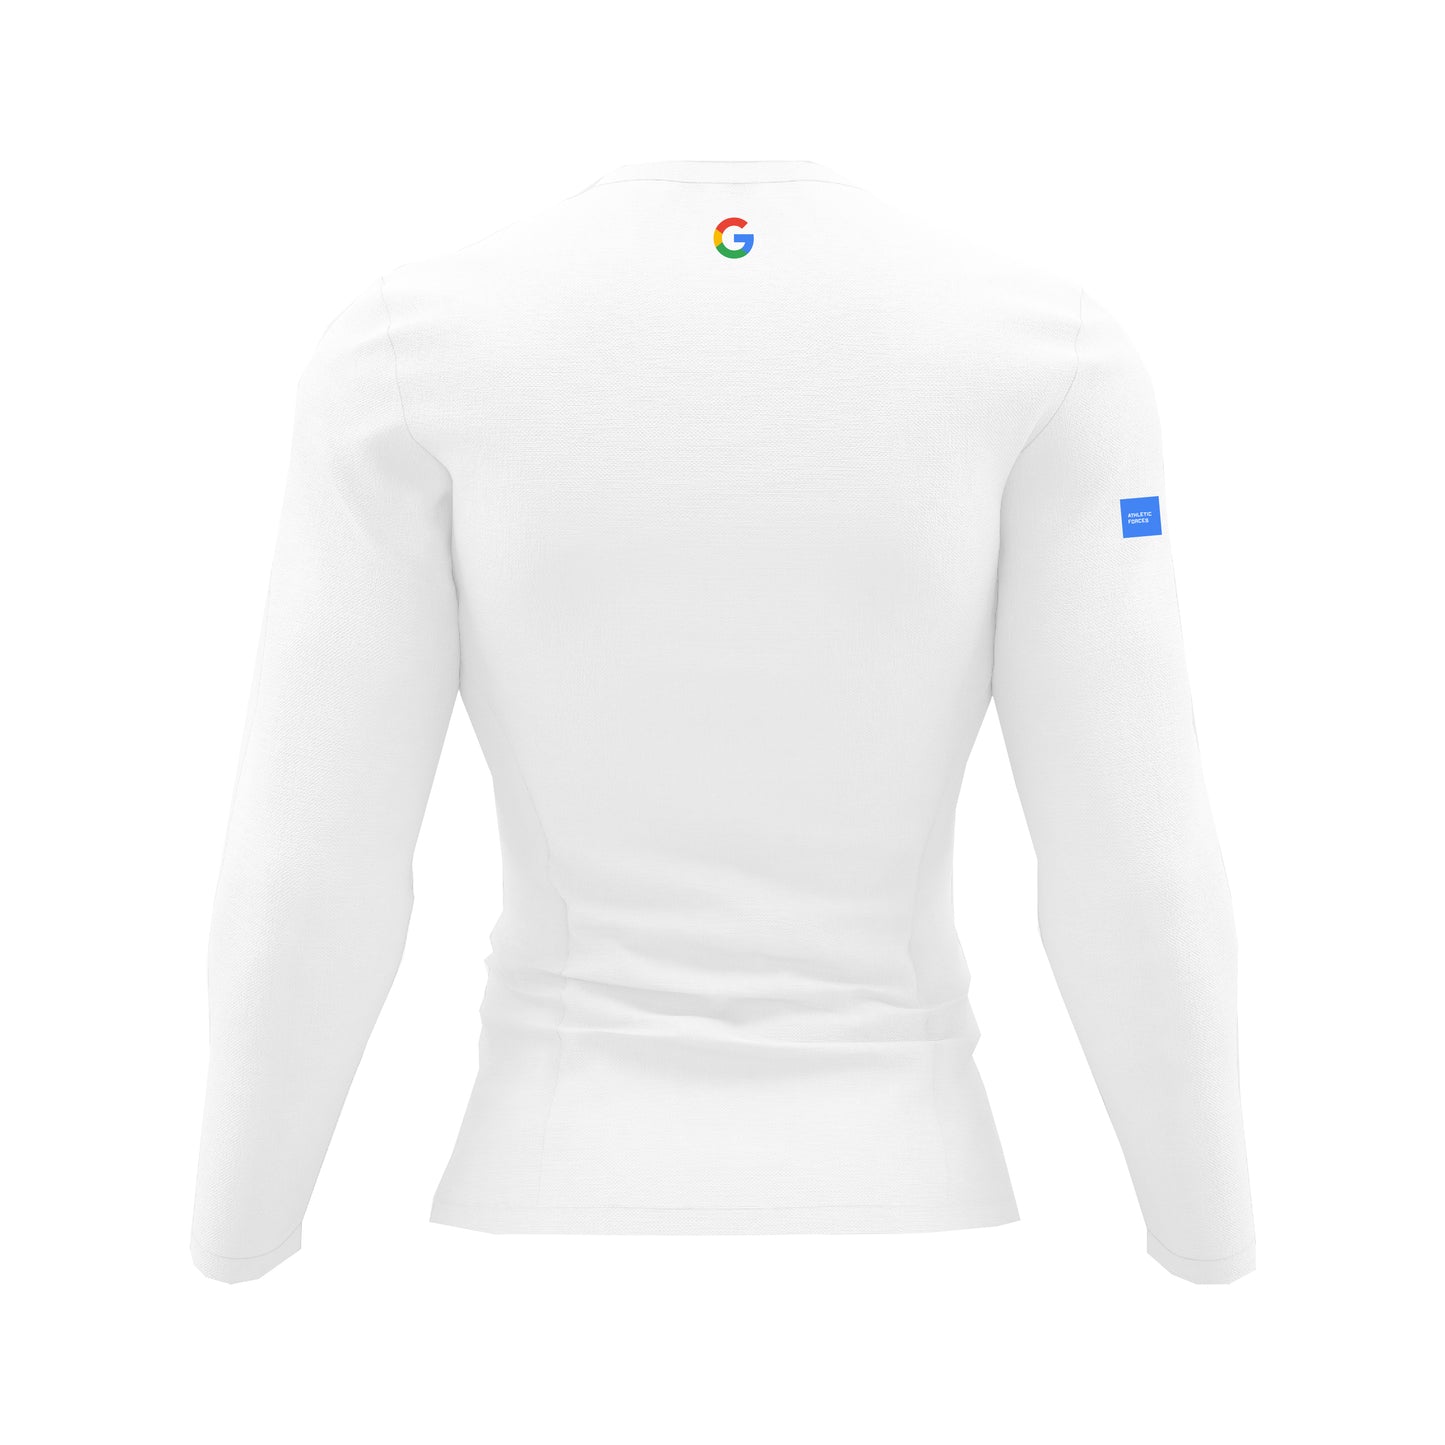 Google - Cyber Force ® Sweatshirt by Athletic Forces -  Model 3